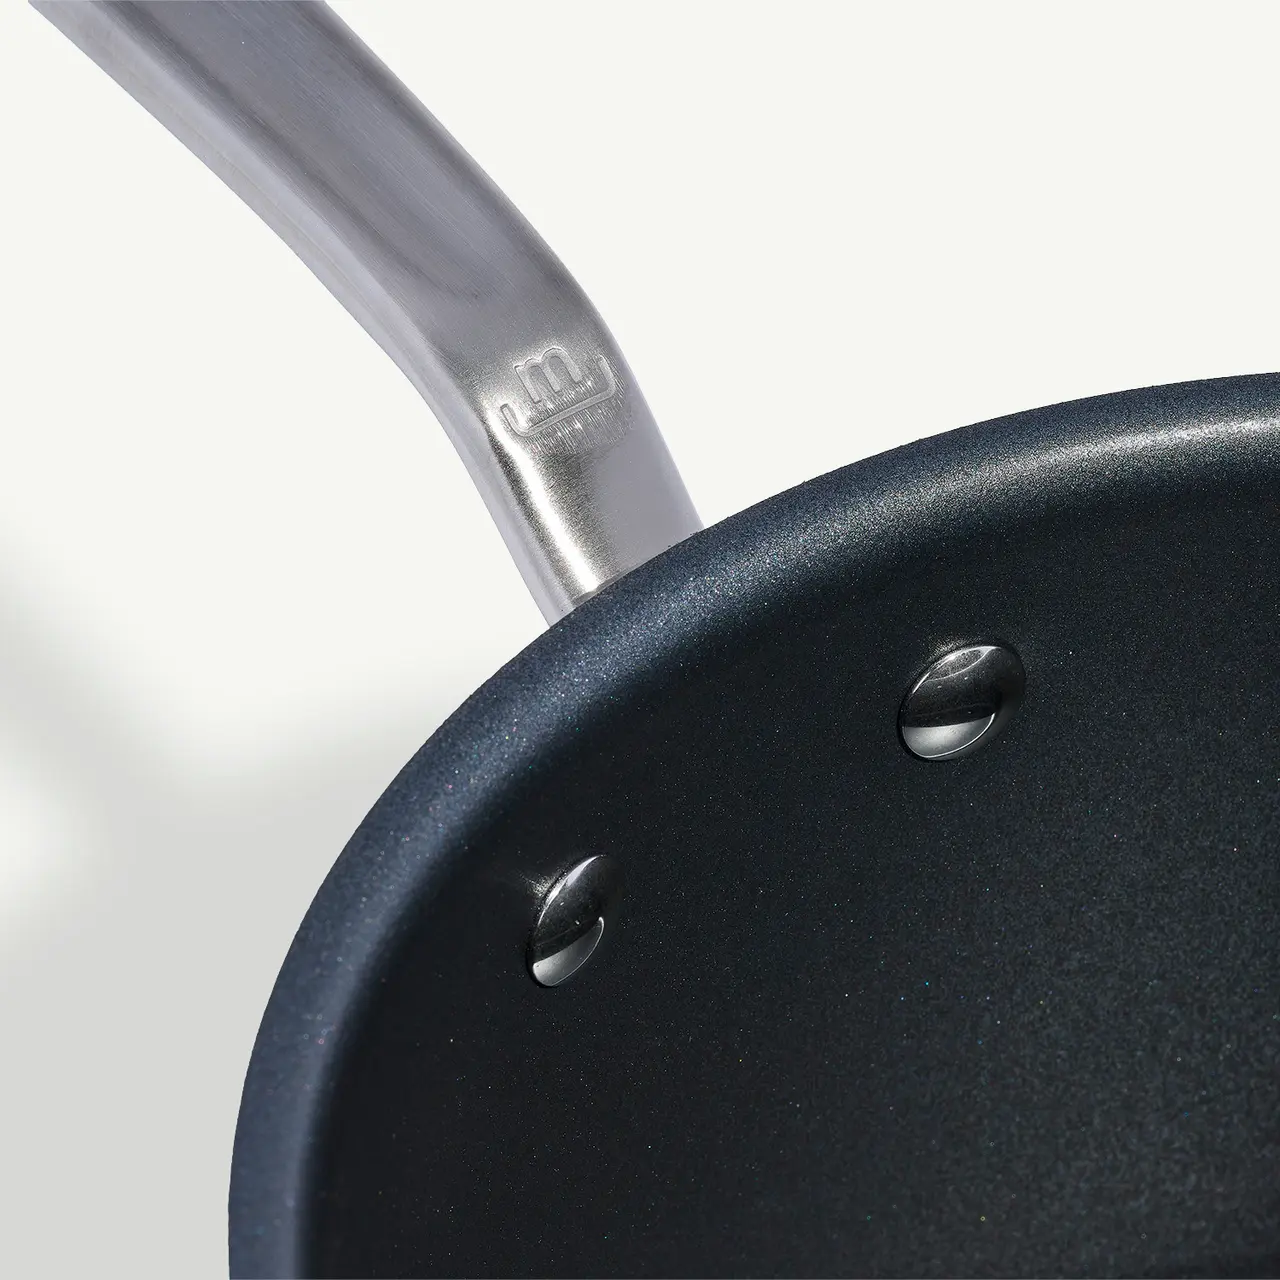 Close-up of a non-stick frying pan with a metal handle, focusing on the riveted interior connection point.